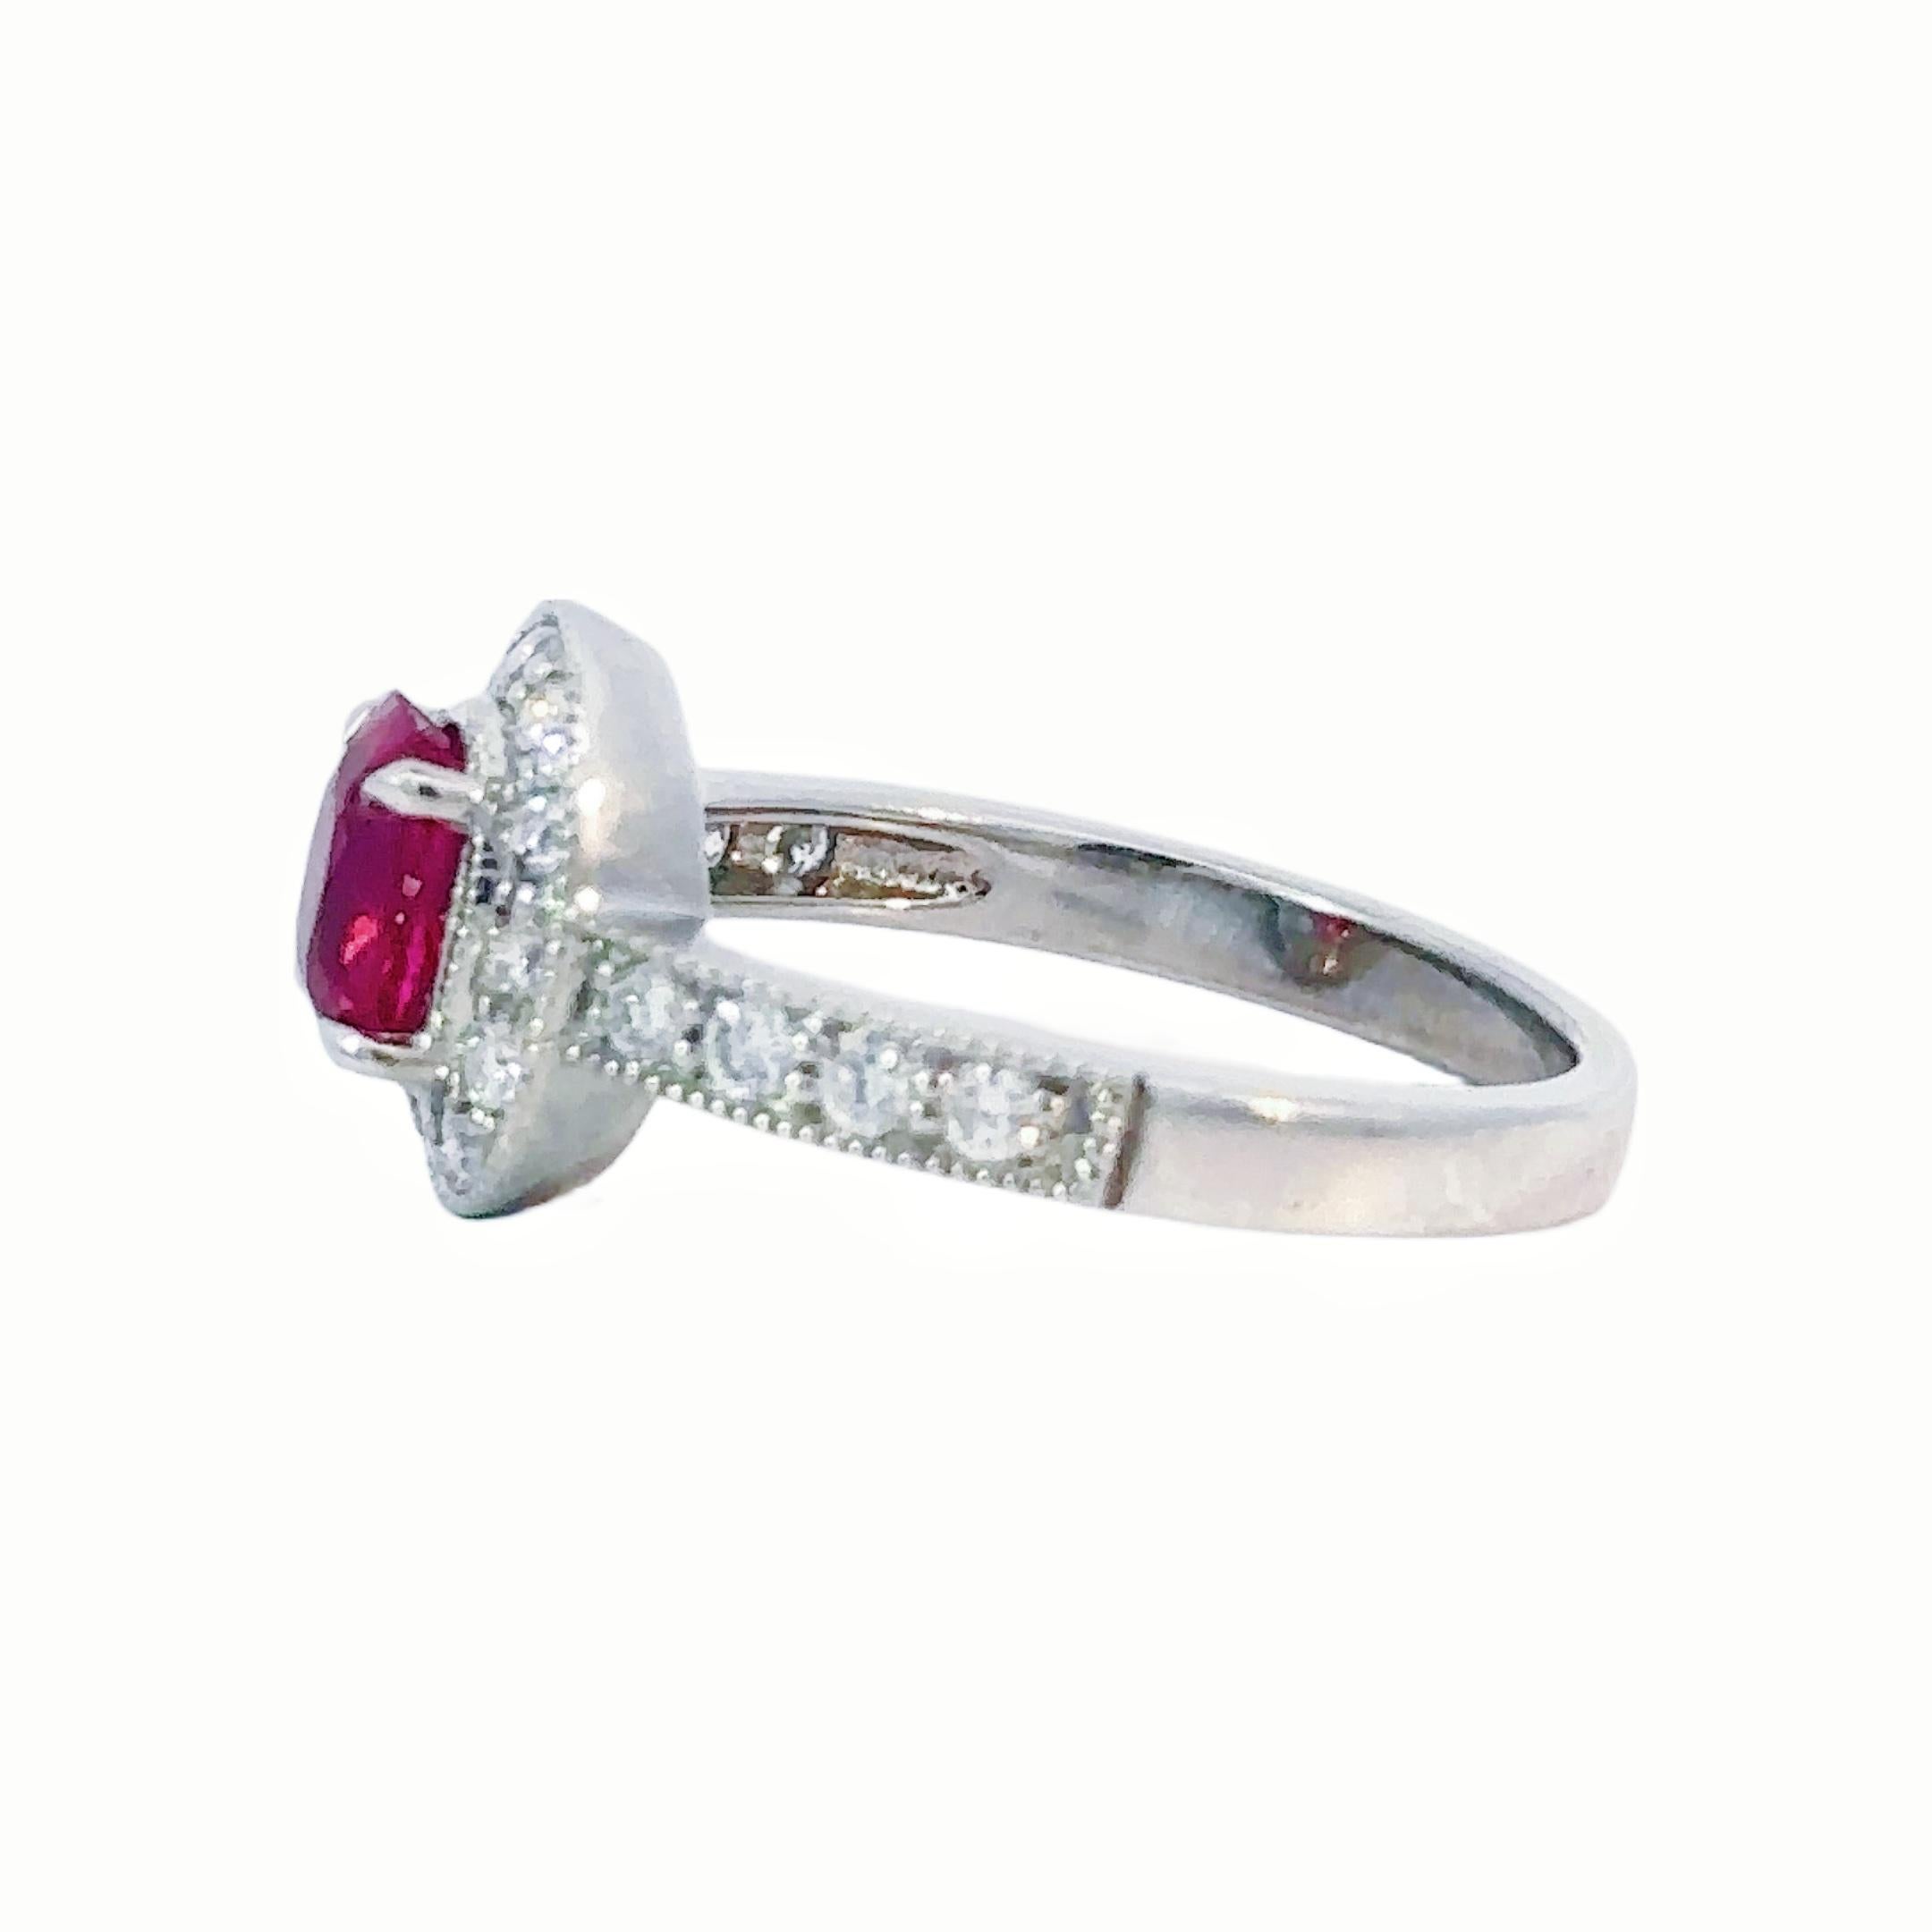 GCS Certified 1.08 Carats Unheated Burma Ruby Diamond Ring In New Condition For Sale In London, GB